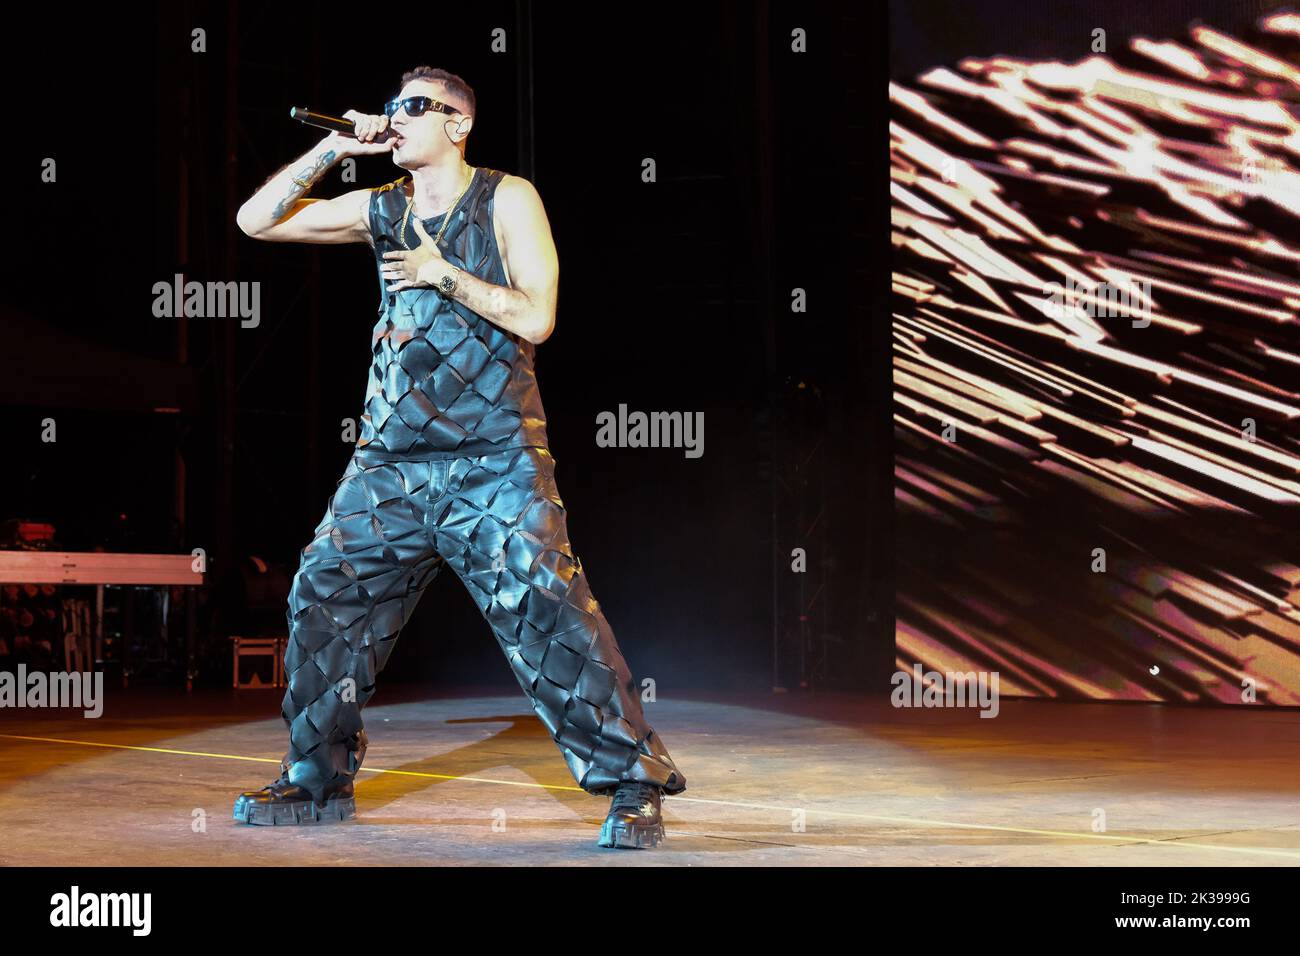 Verona, Italy. 25th September, 2022. The Italian rappers Fabio Bartolo Rizzo as know with Marracash pseudonym sings on a stage for his Persone Tour at Arena di Verona in Verona, Italy, on 25 September 2022 Credit: Roberto Tommasini/Alamy Live News Stock Photo